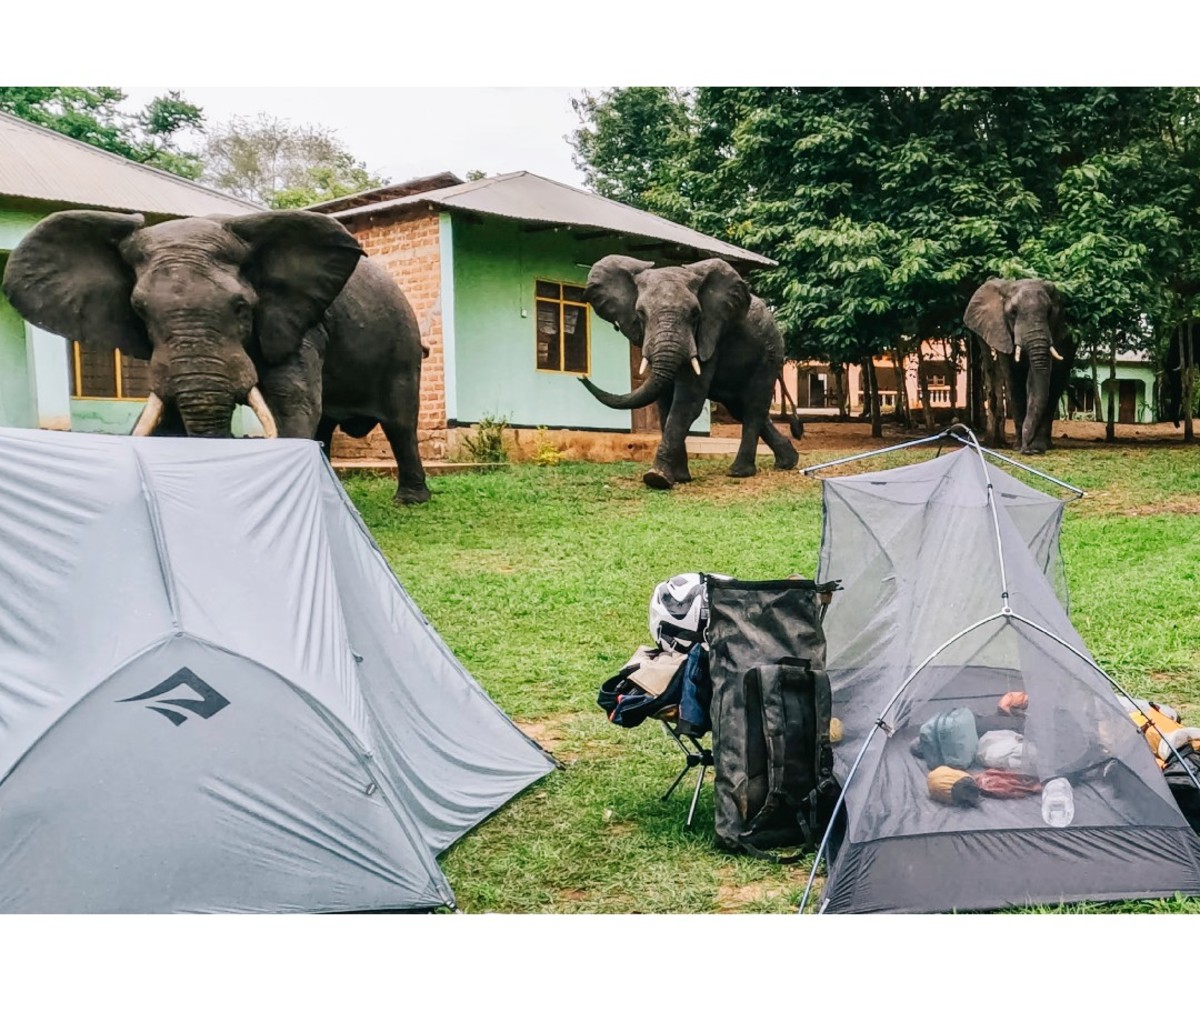 African Elephants walking past some tents on the grass.